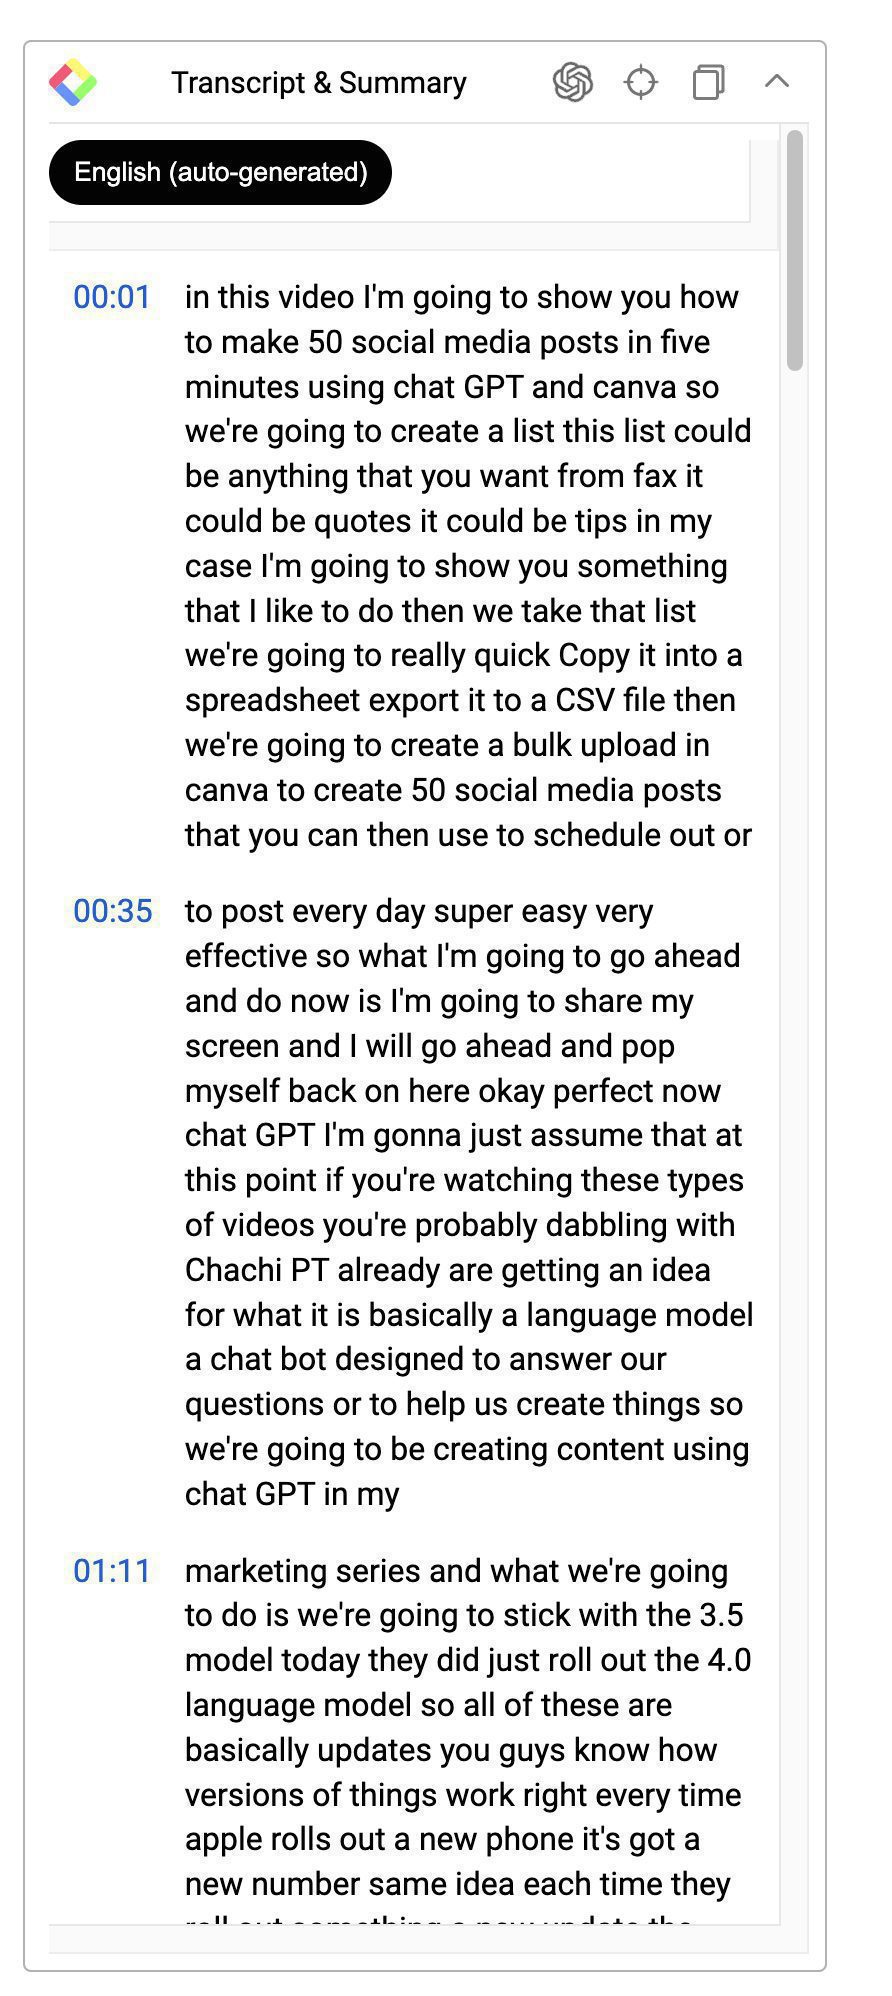 Youtube transcript & Summary shows the instant youtube transcript with time stamps